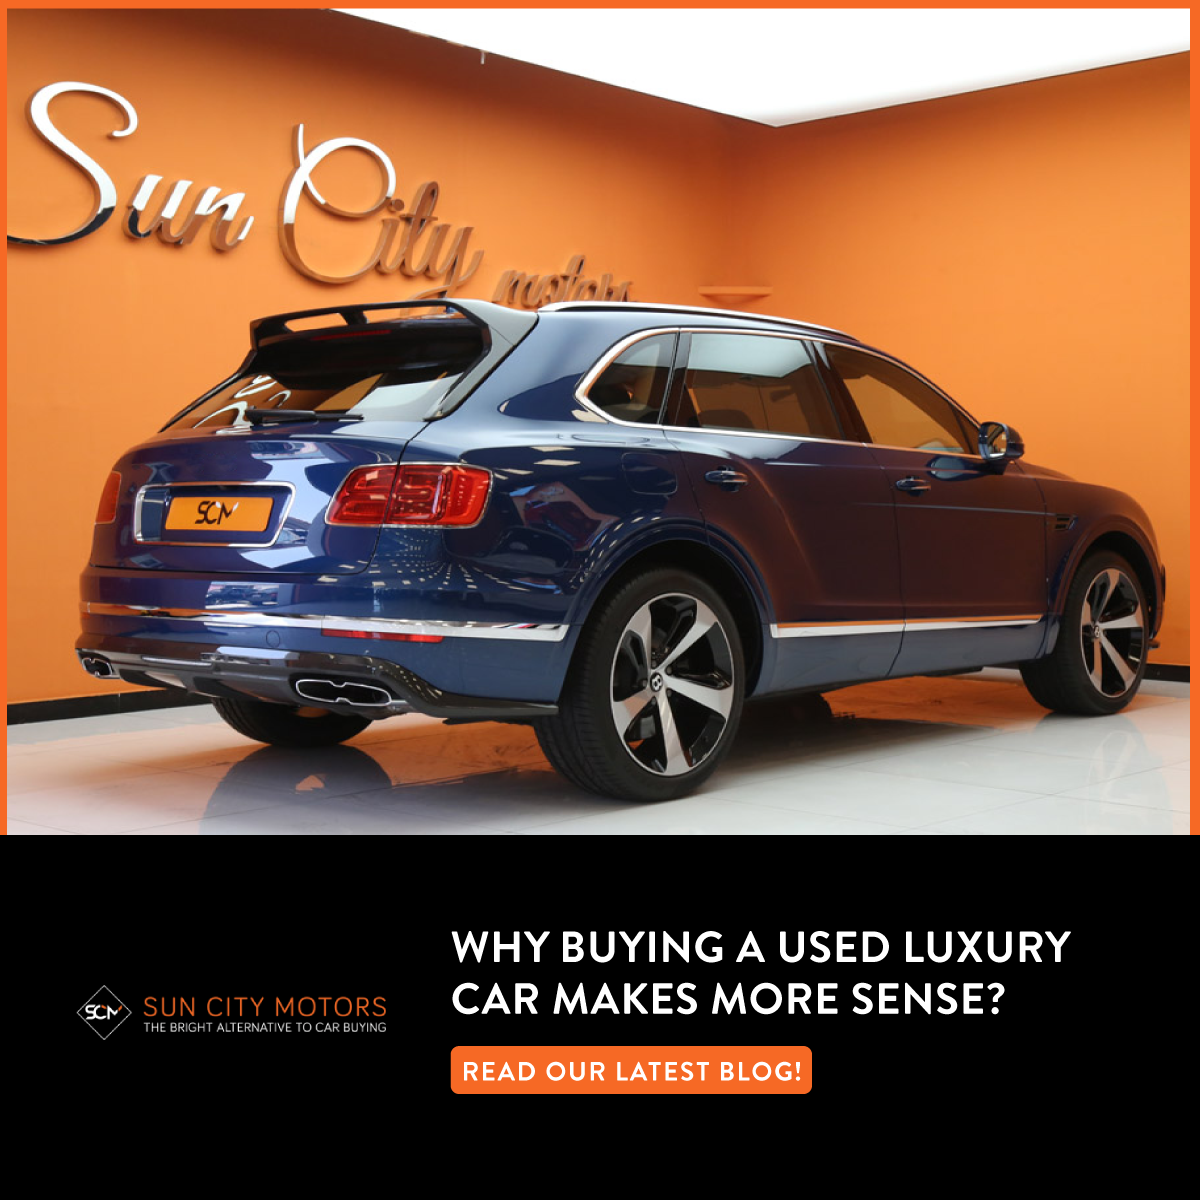 Why Buying a Used Luxury Car Makes More Sense?